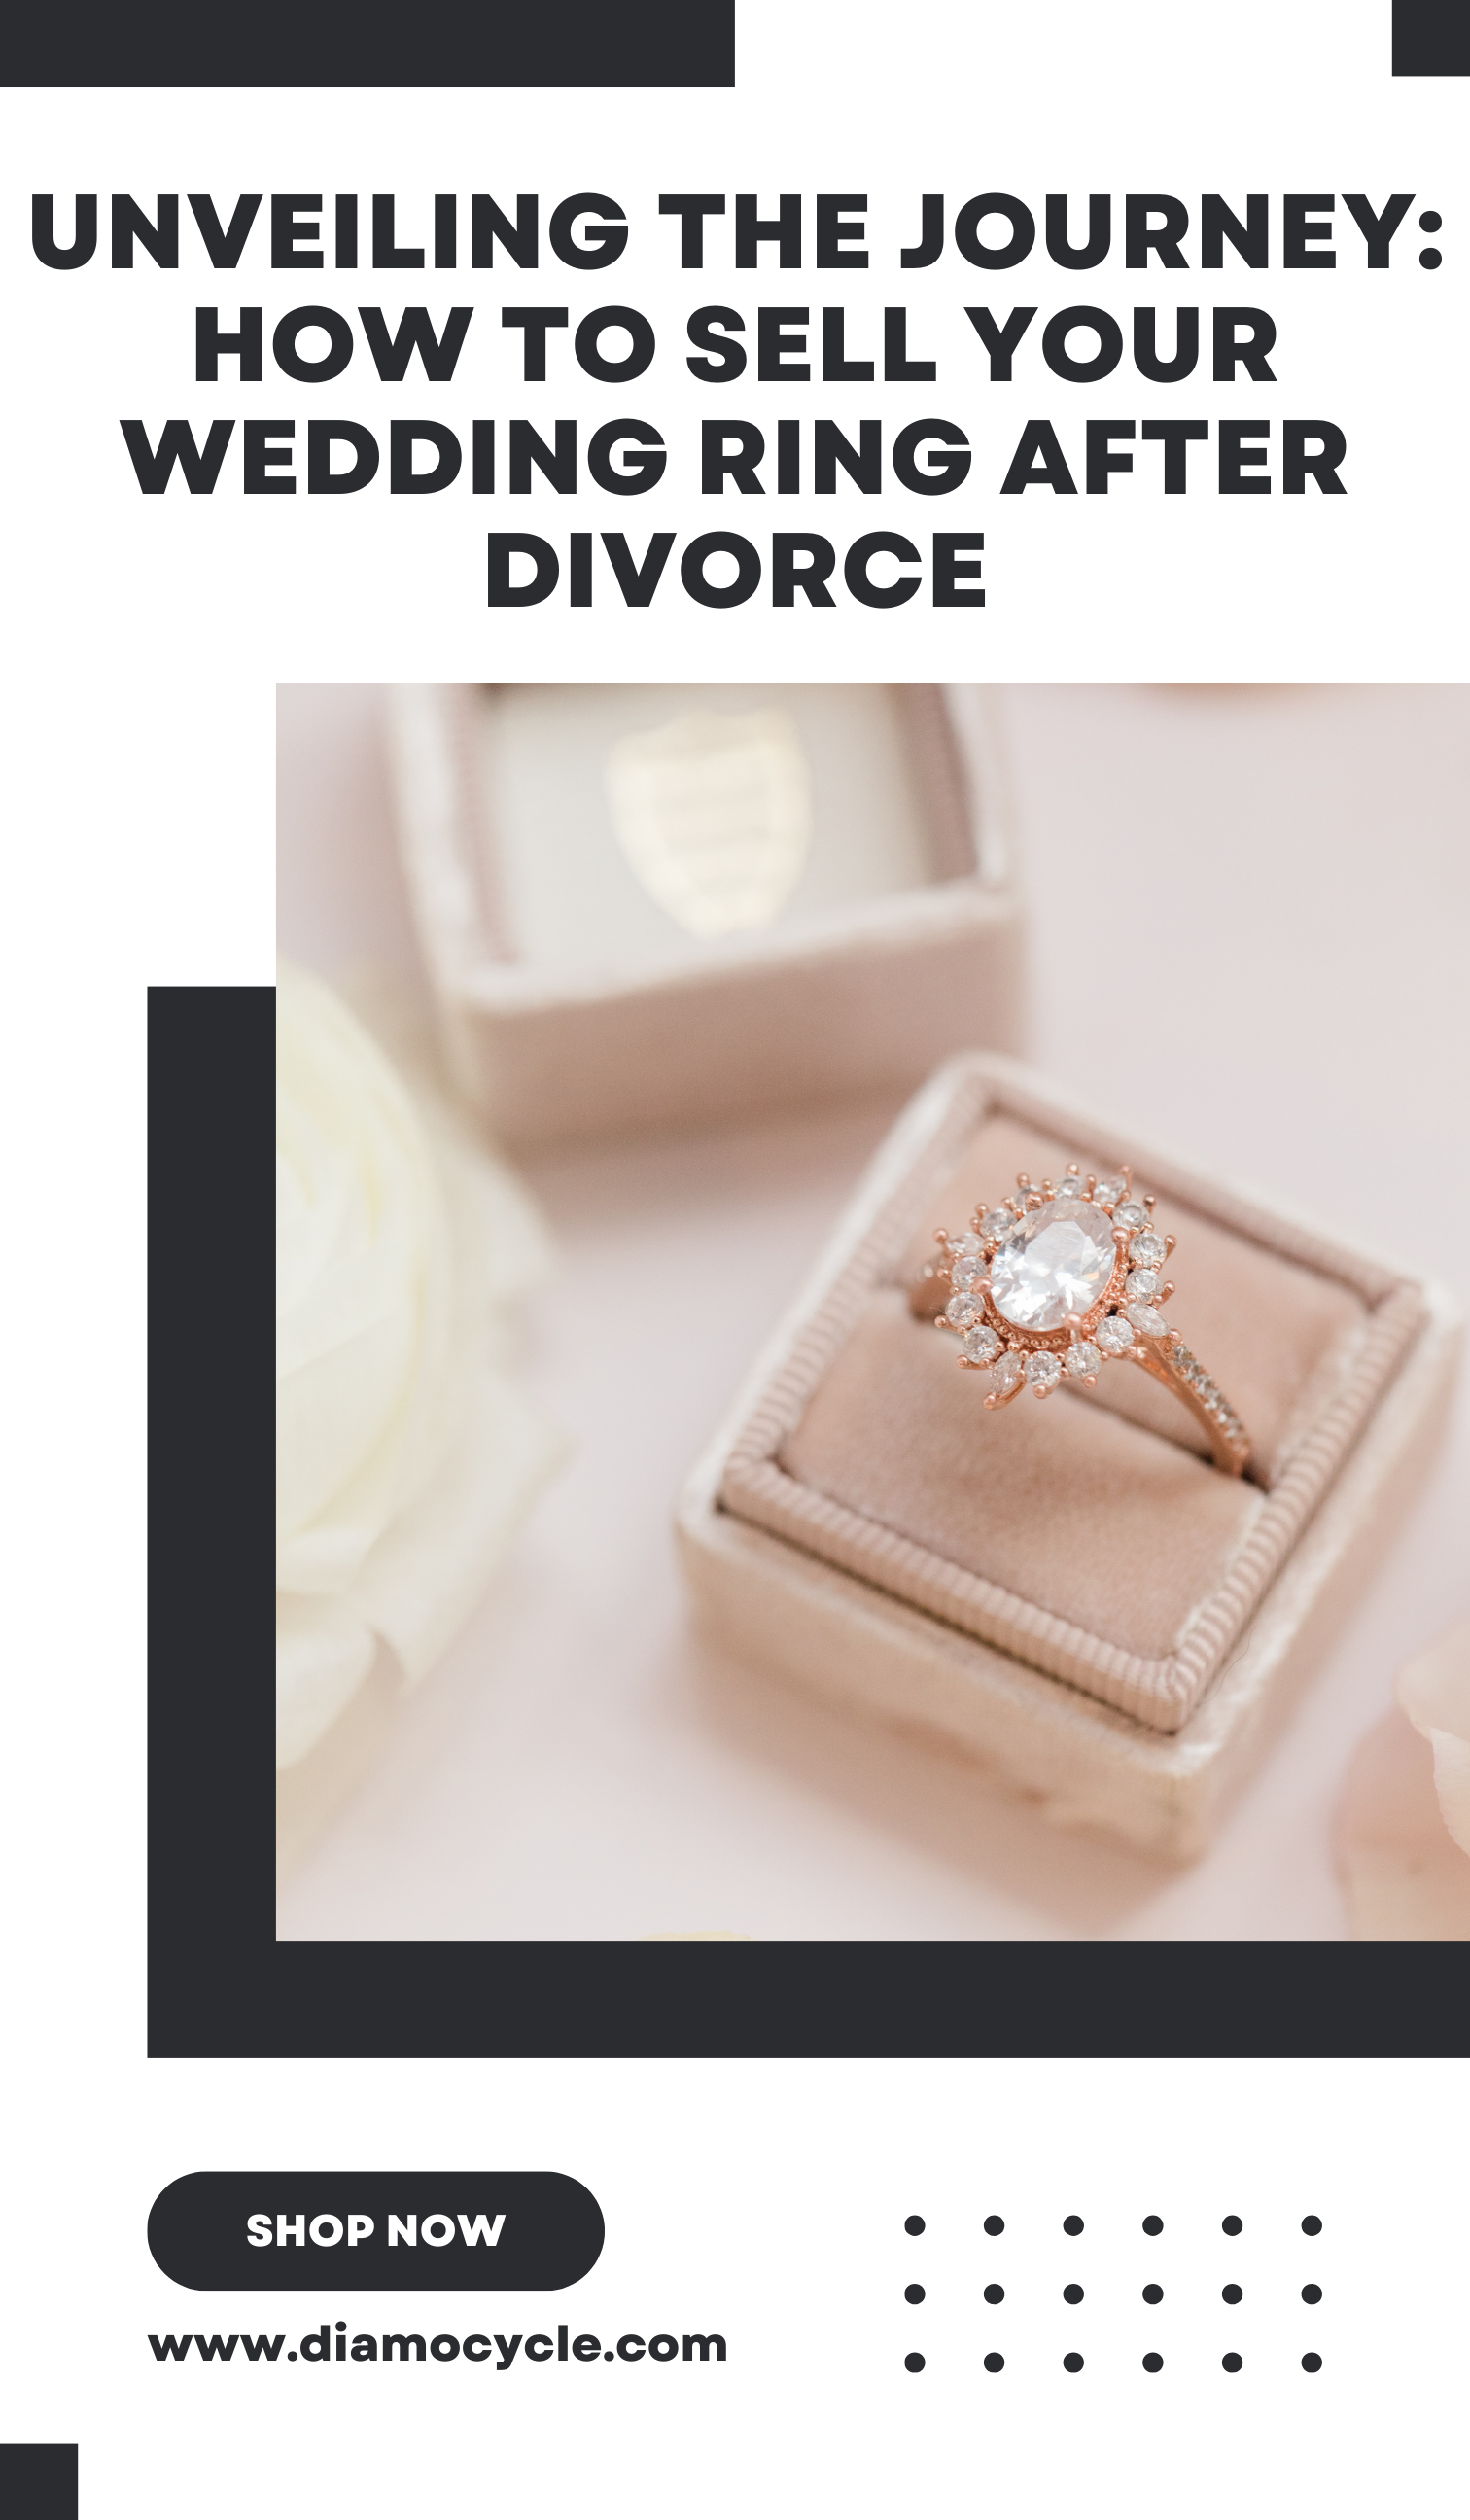 Unveiling the Journey: How to Sell Your Wedding Ring After Divorce